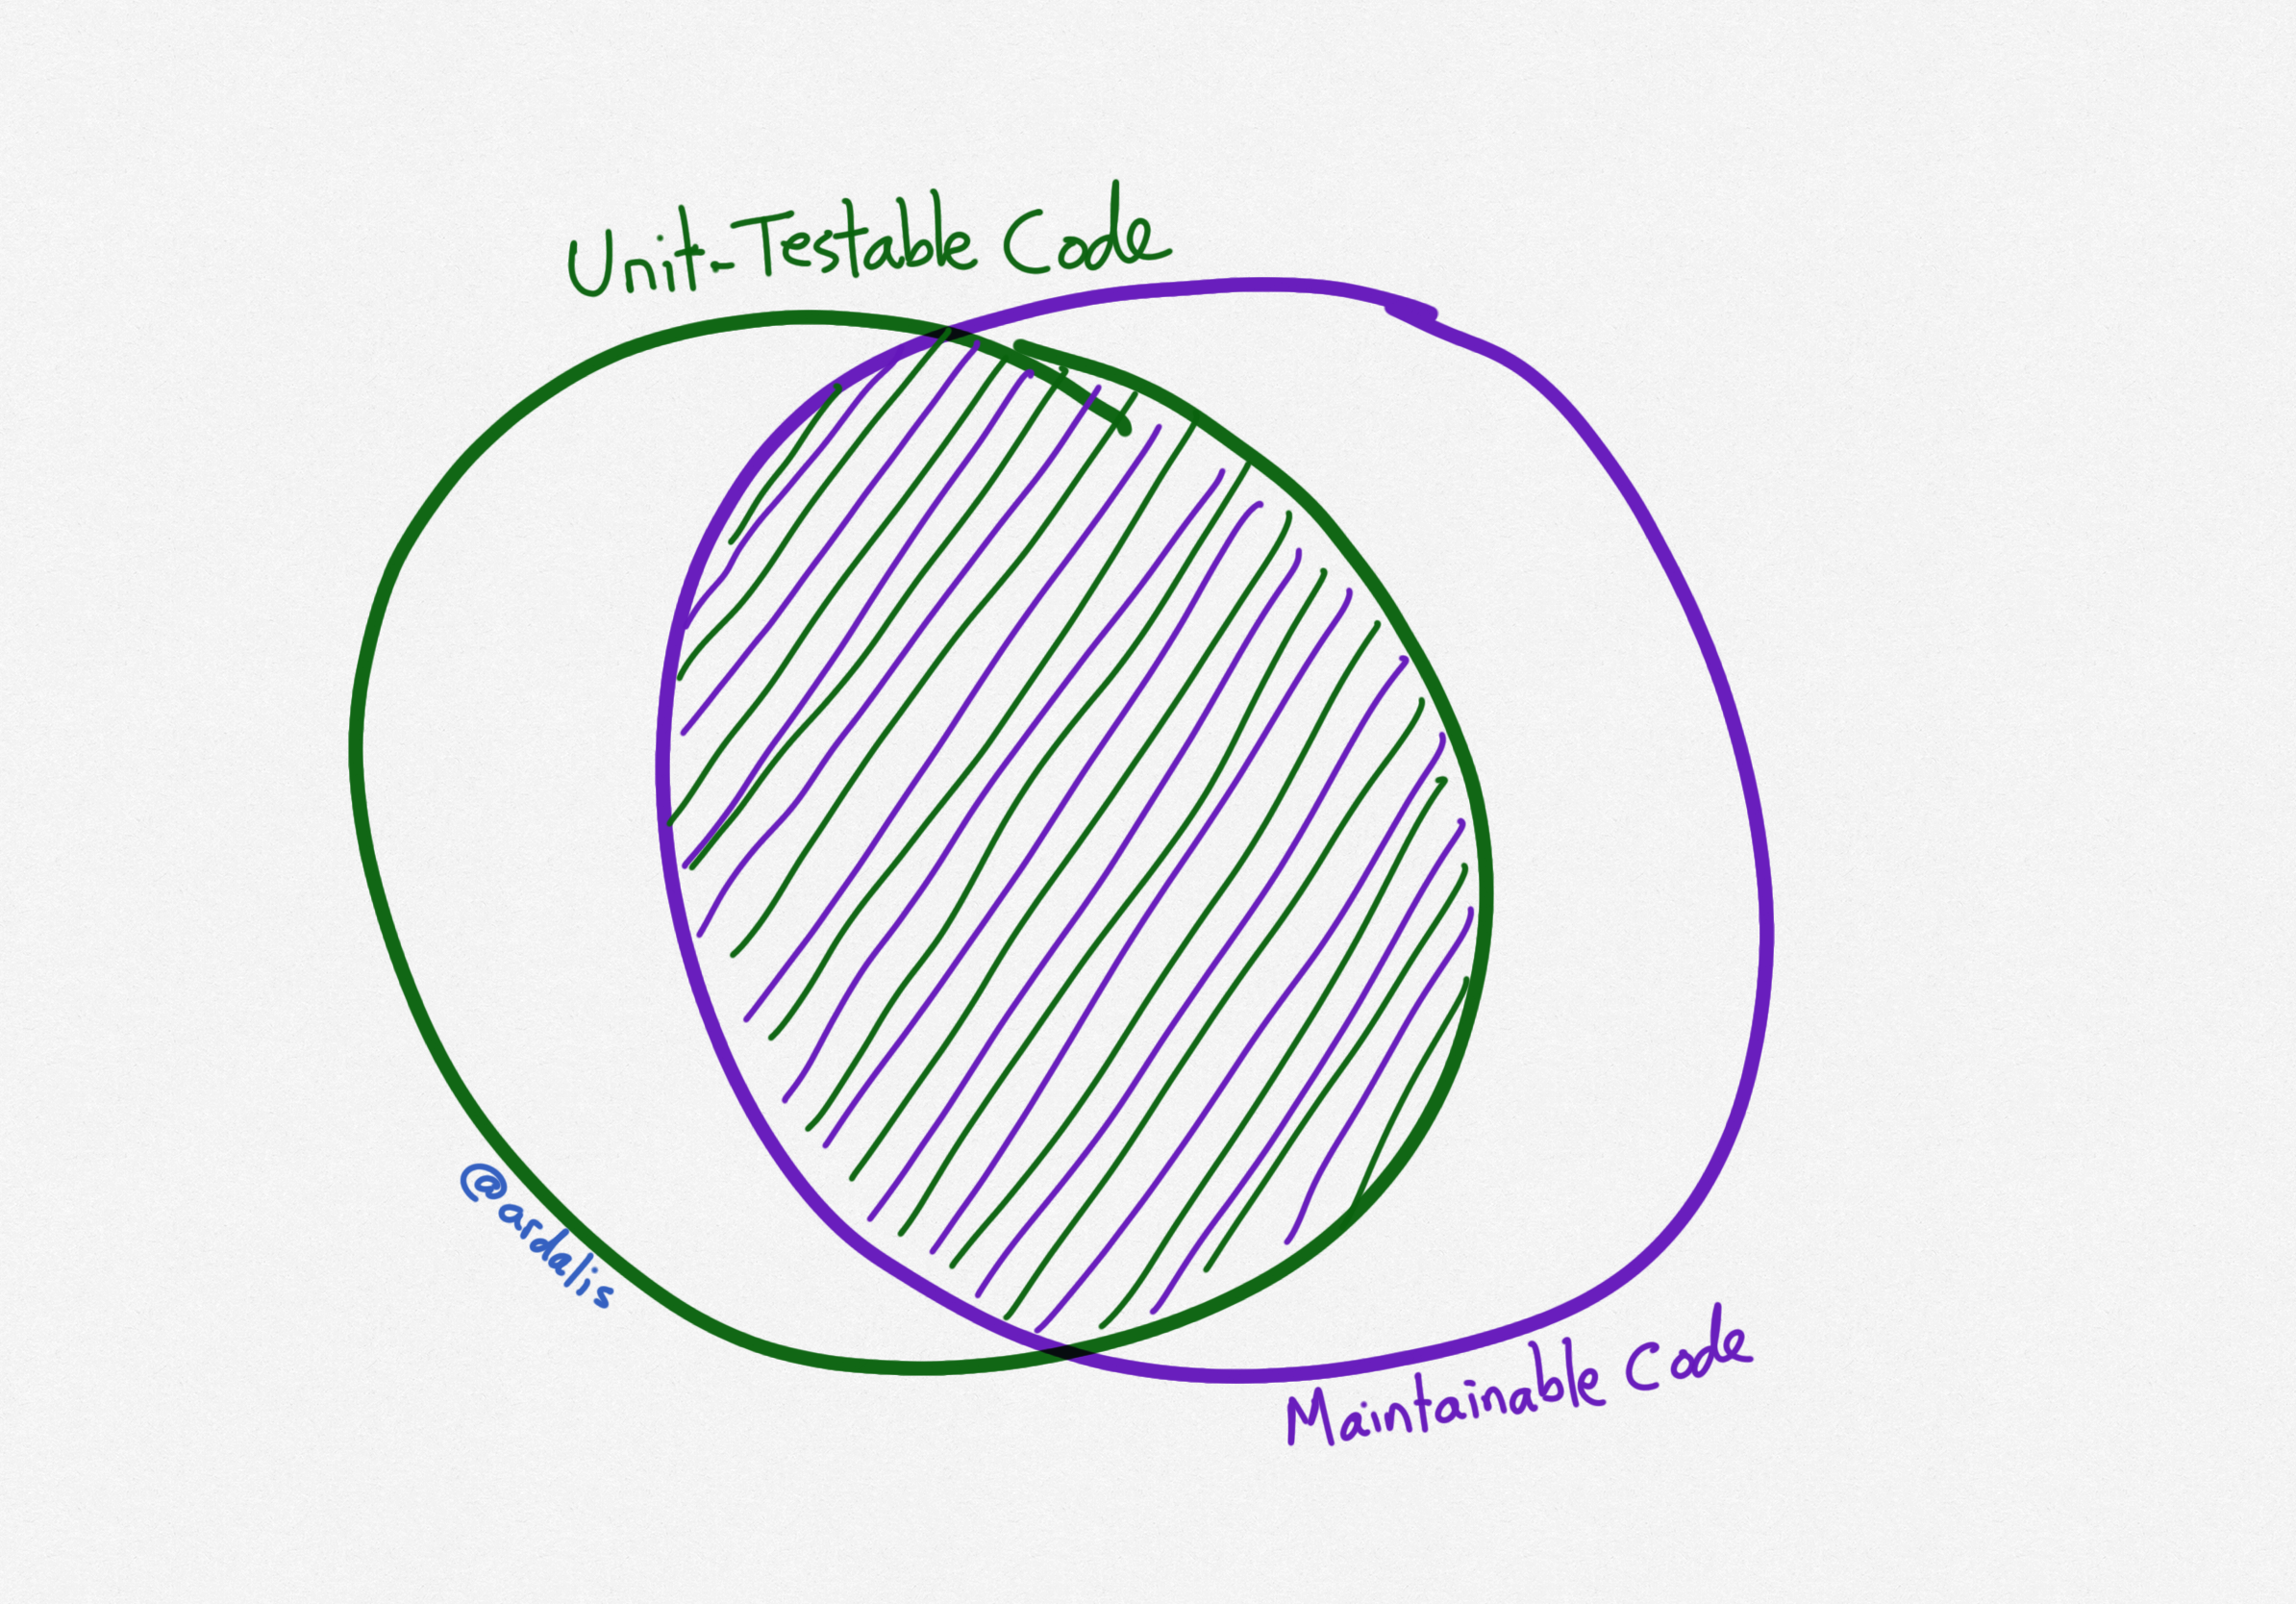 venn diagram of unit testable code and maintainable code